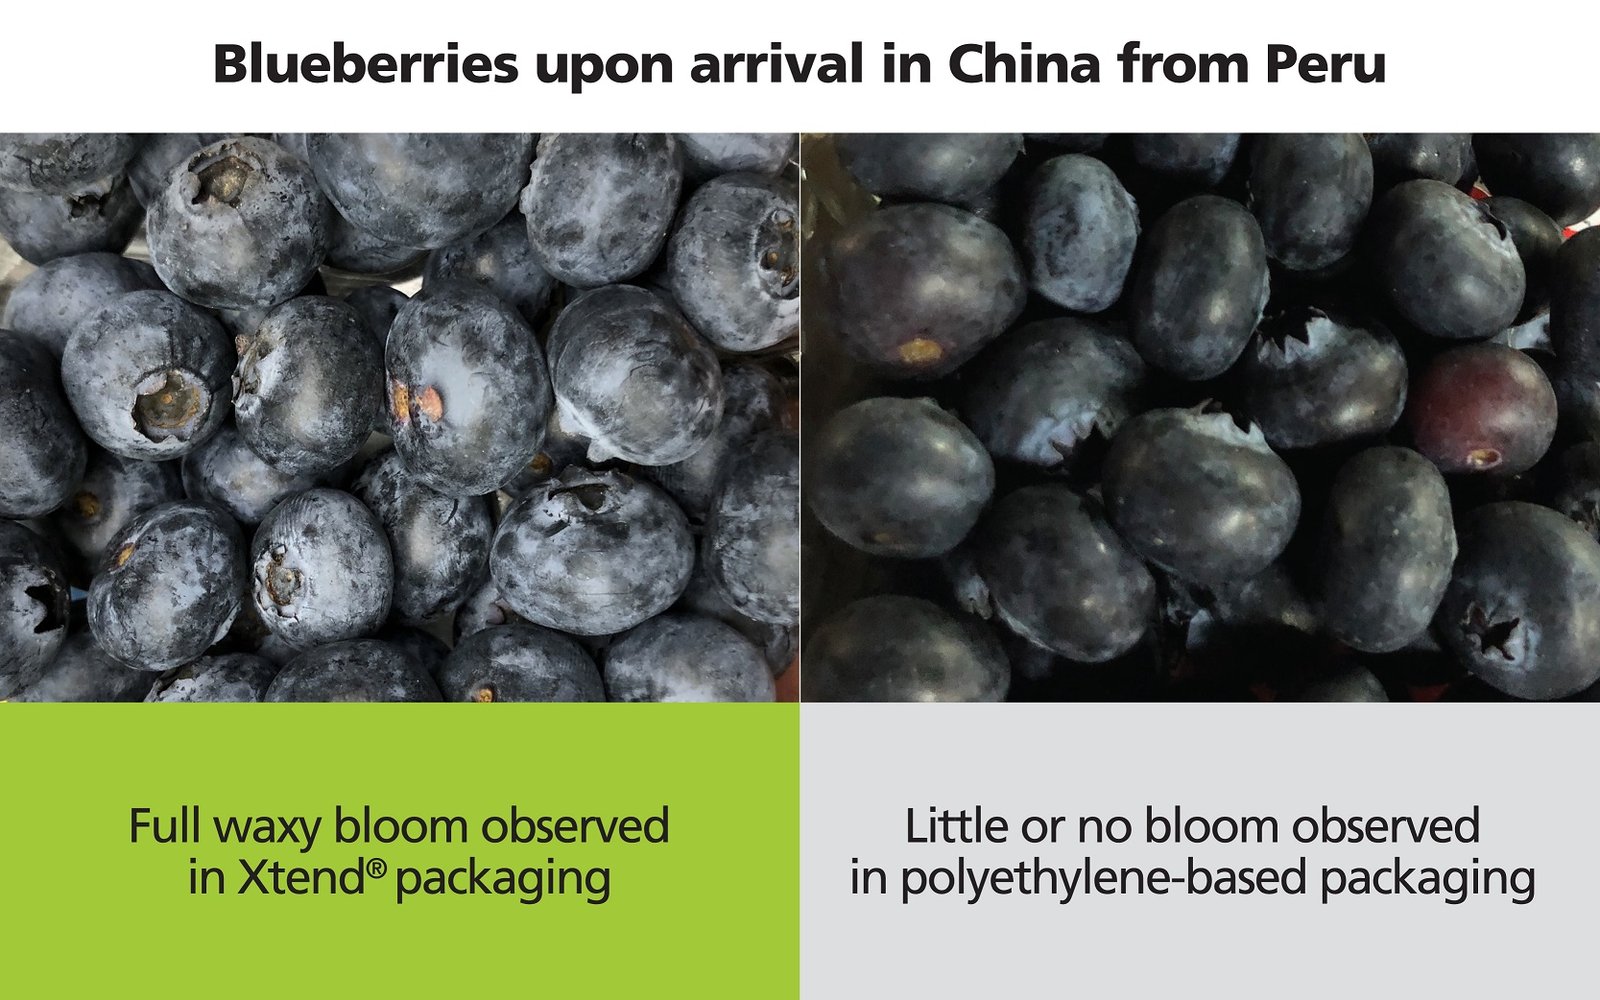 Xtend packaging retains waxy bloom of blueberries